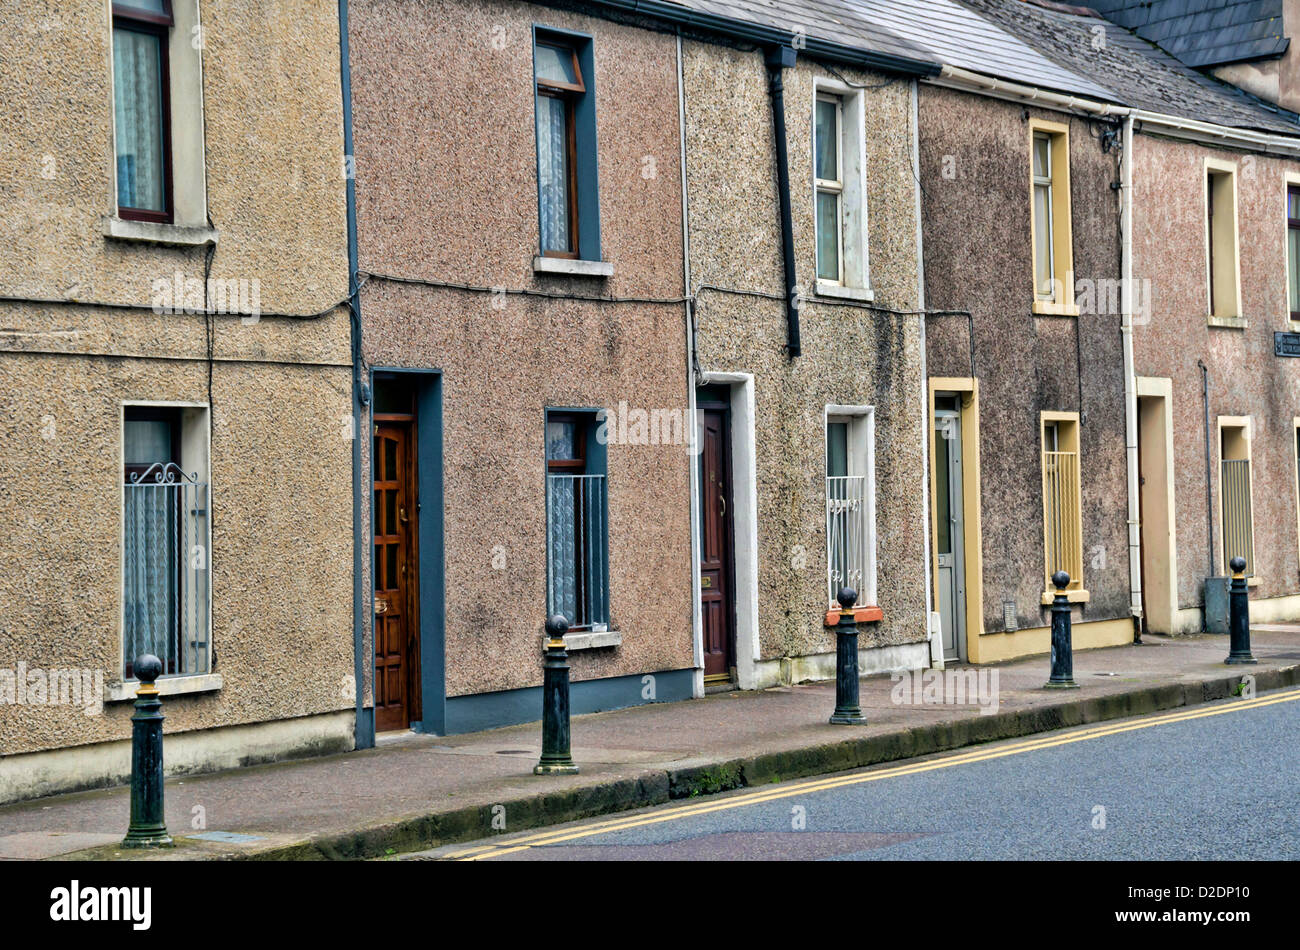 A row of old Terraced houses in Ireland Stock Photo